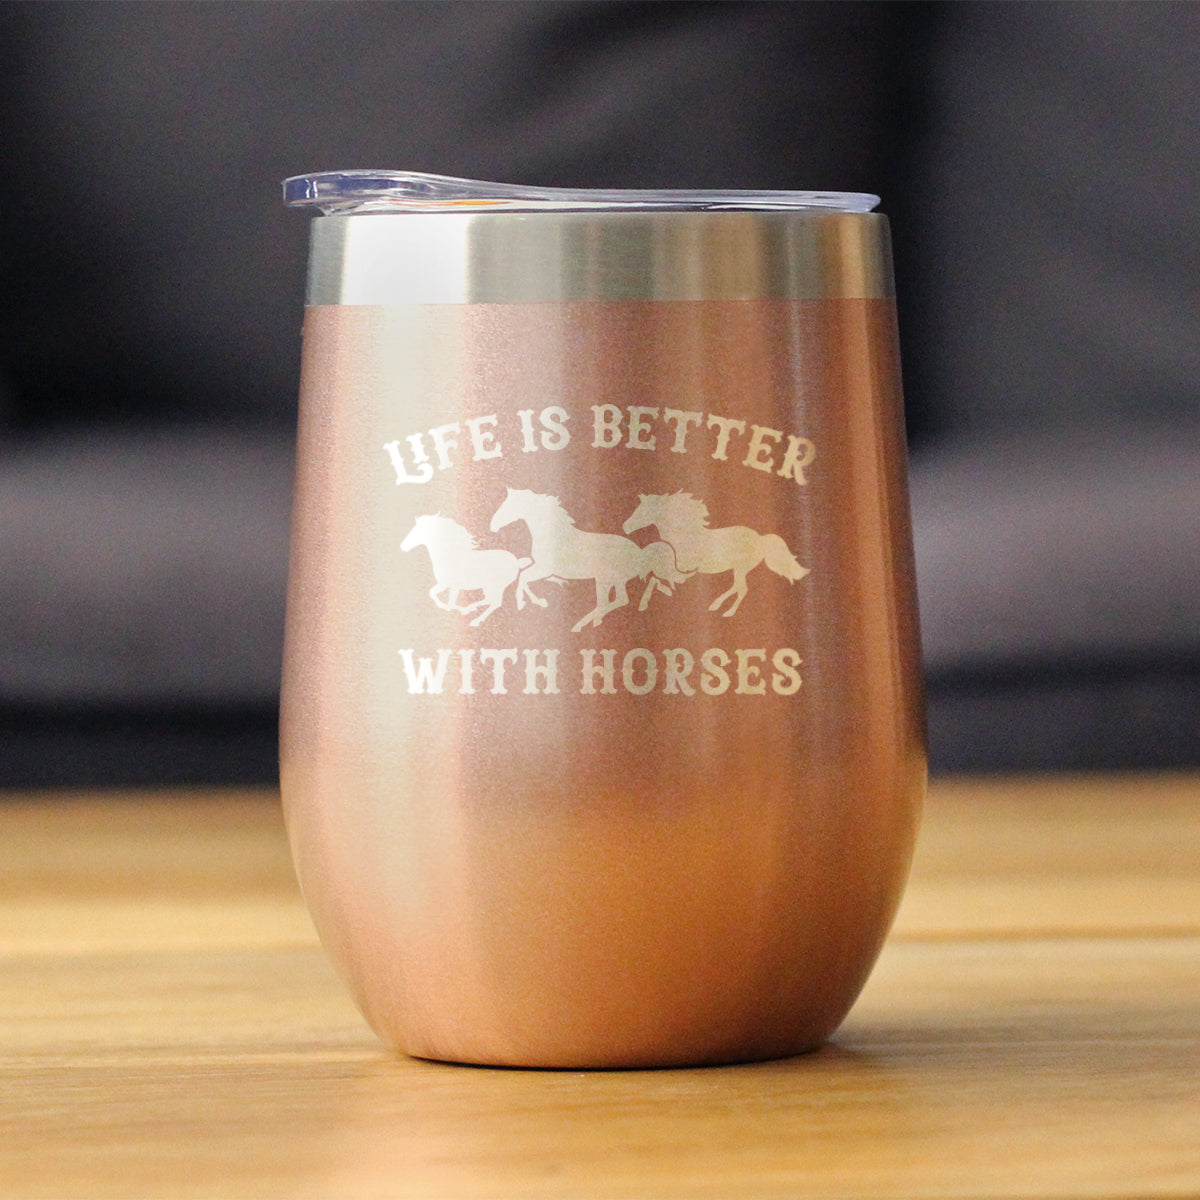 Life is Better With Horses - Wine Tumbler Glass with Sliding Lid - Stainless Steel Travel Mug - Horse Gifts for Women and Men